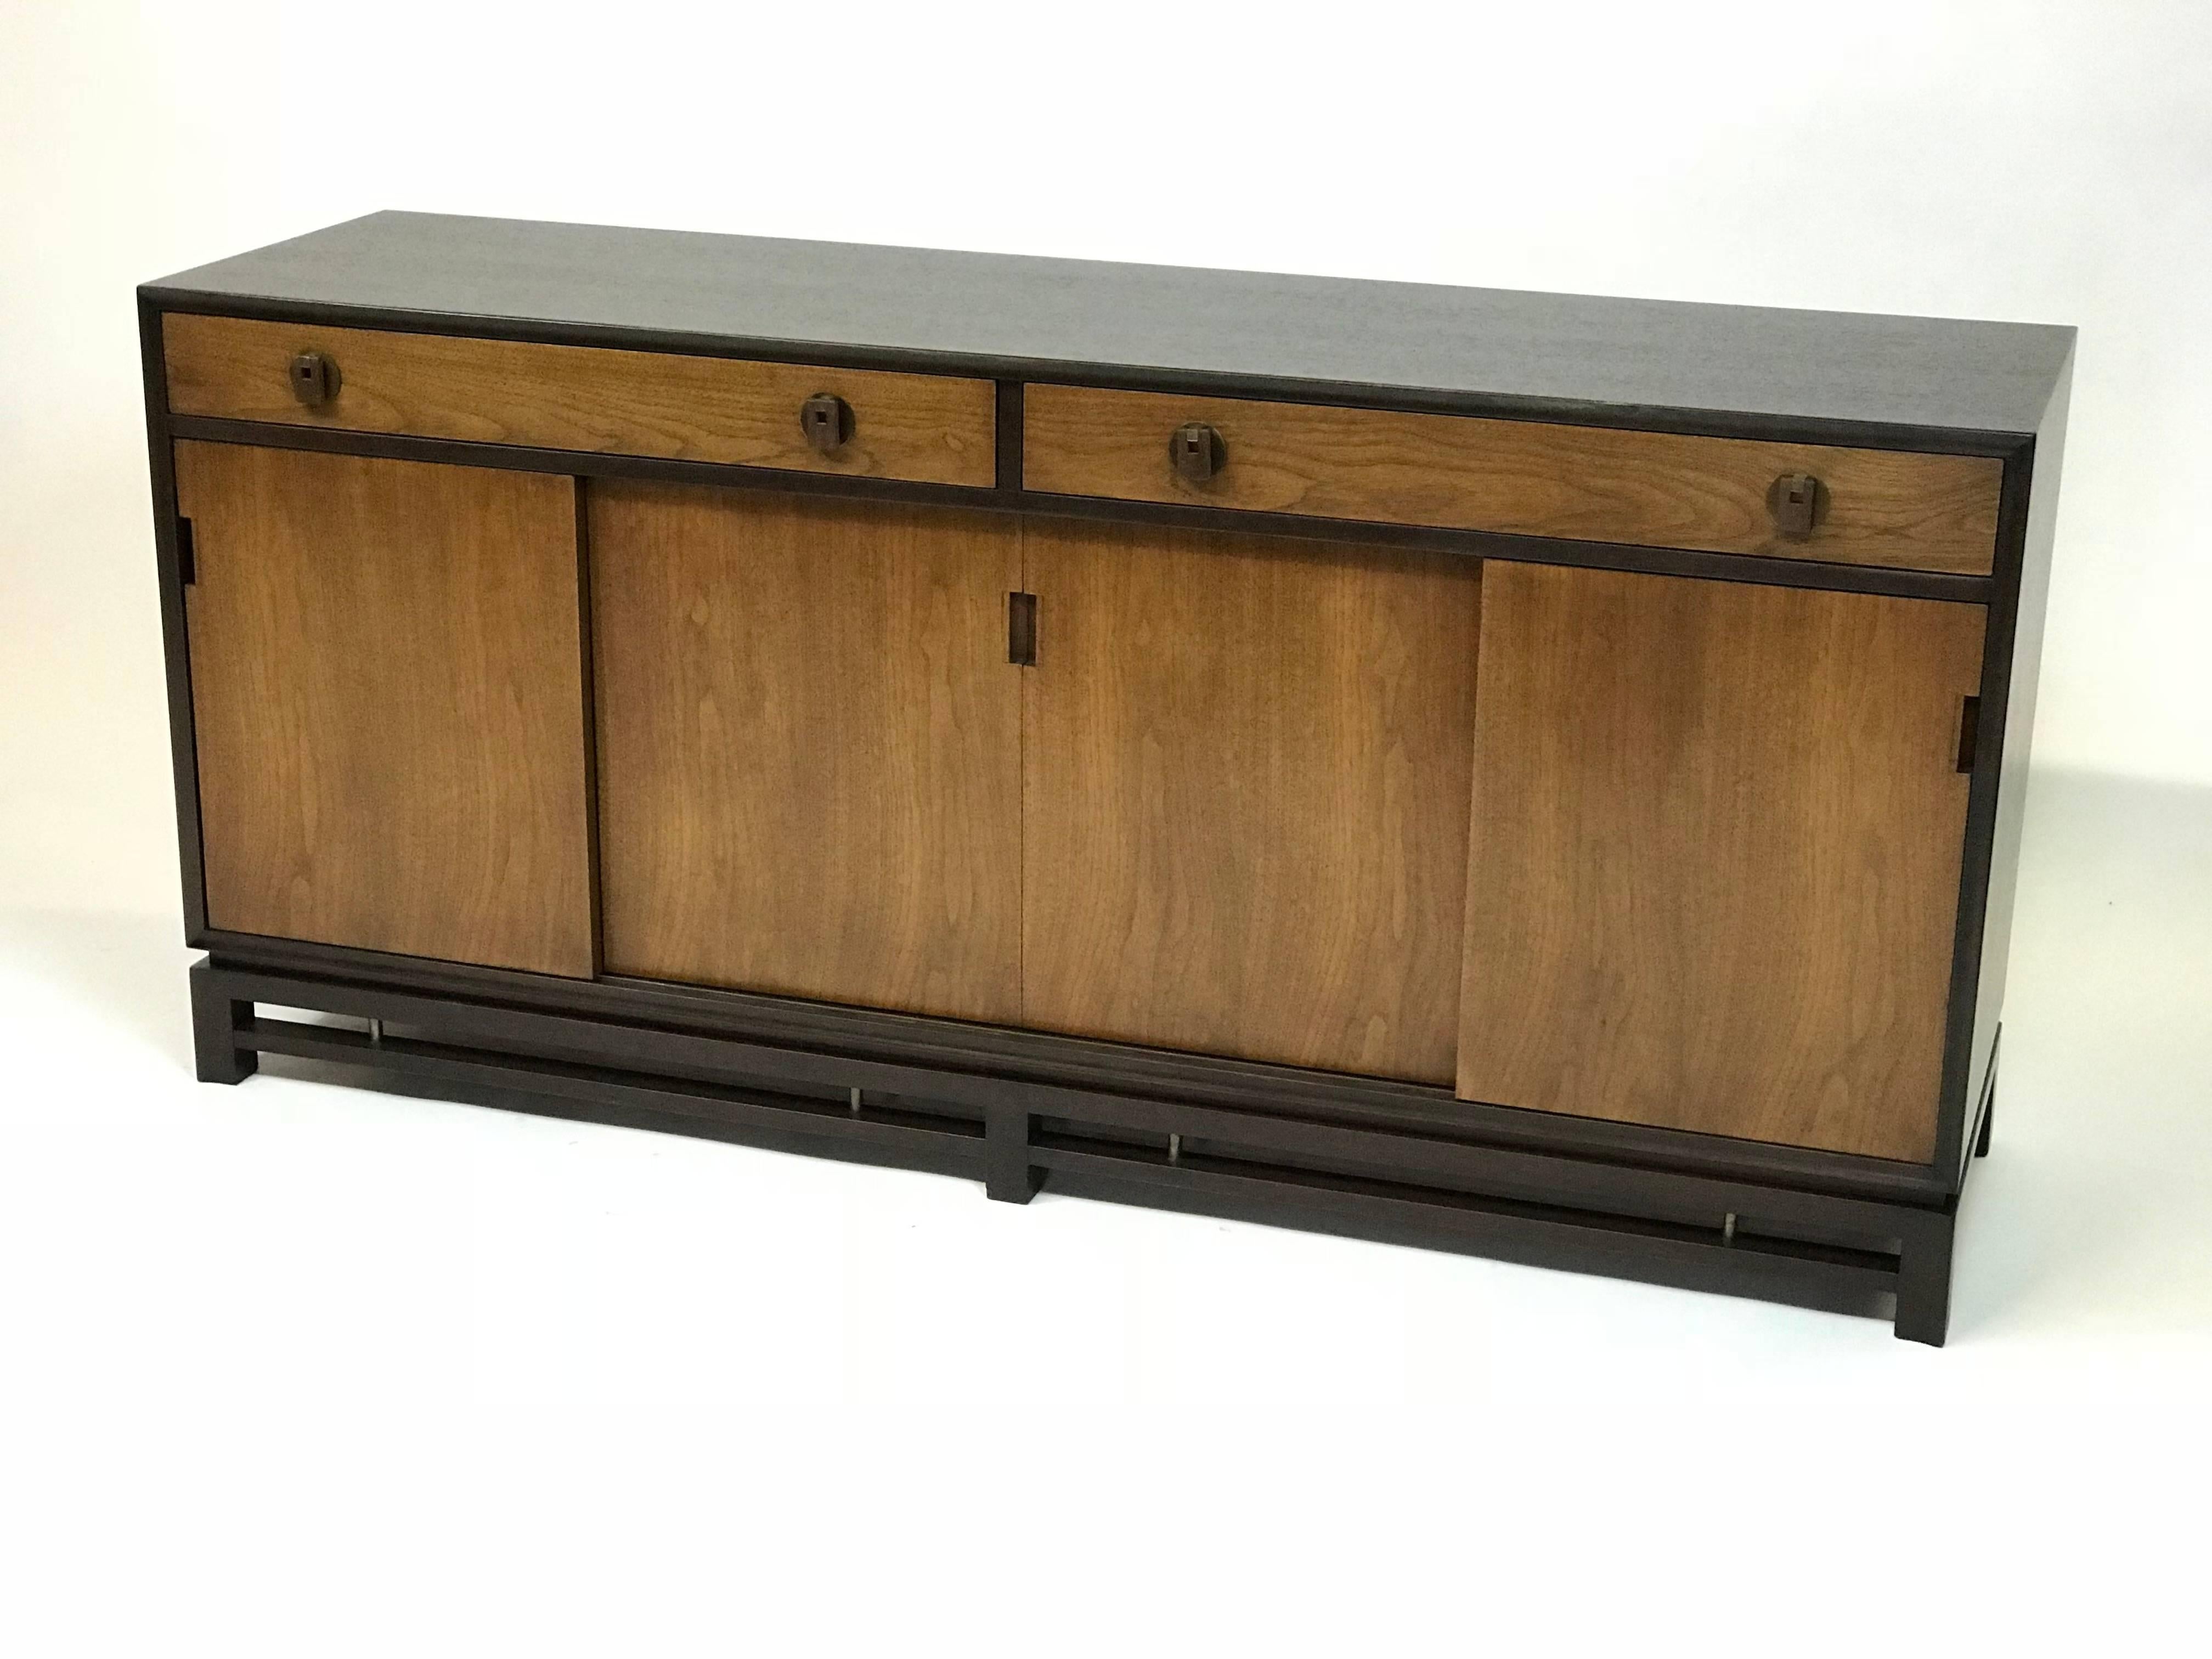 Mid-Century Modern, two-tone, sideboard or credenza by Edward Wormley for Dunbar features an ebonized mahogany surround with walnut doors and brass handles and accents on the lattice base. The cabinet has a finished backside.